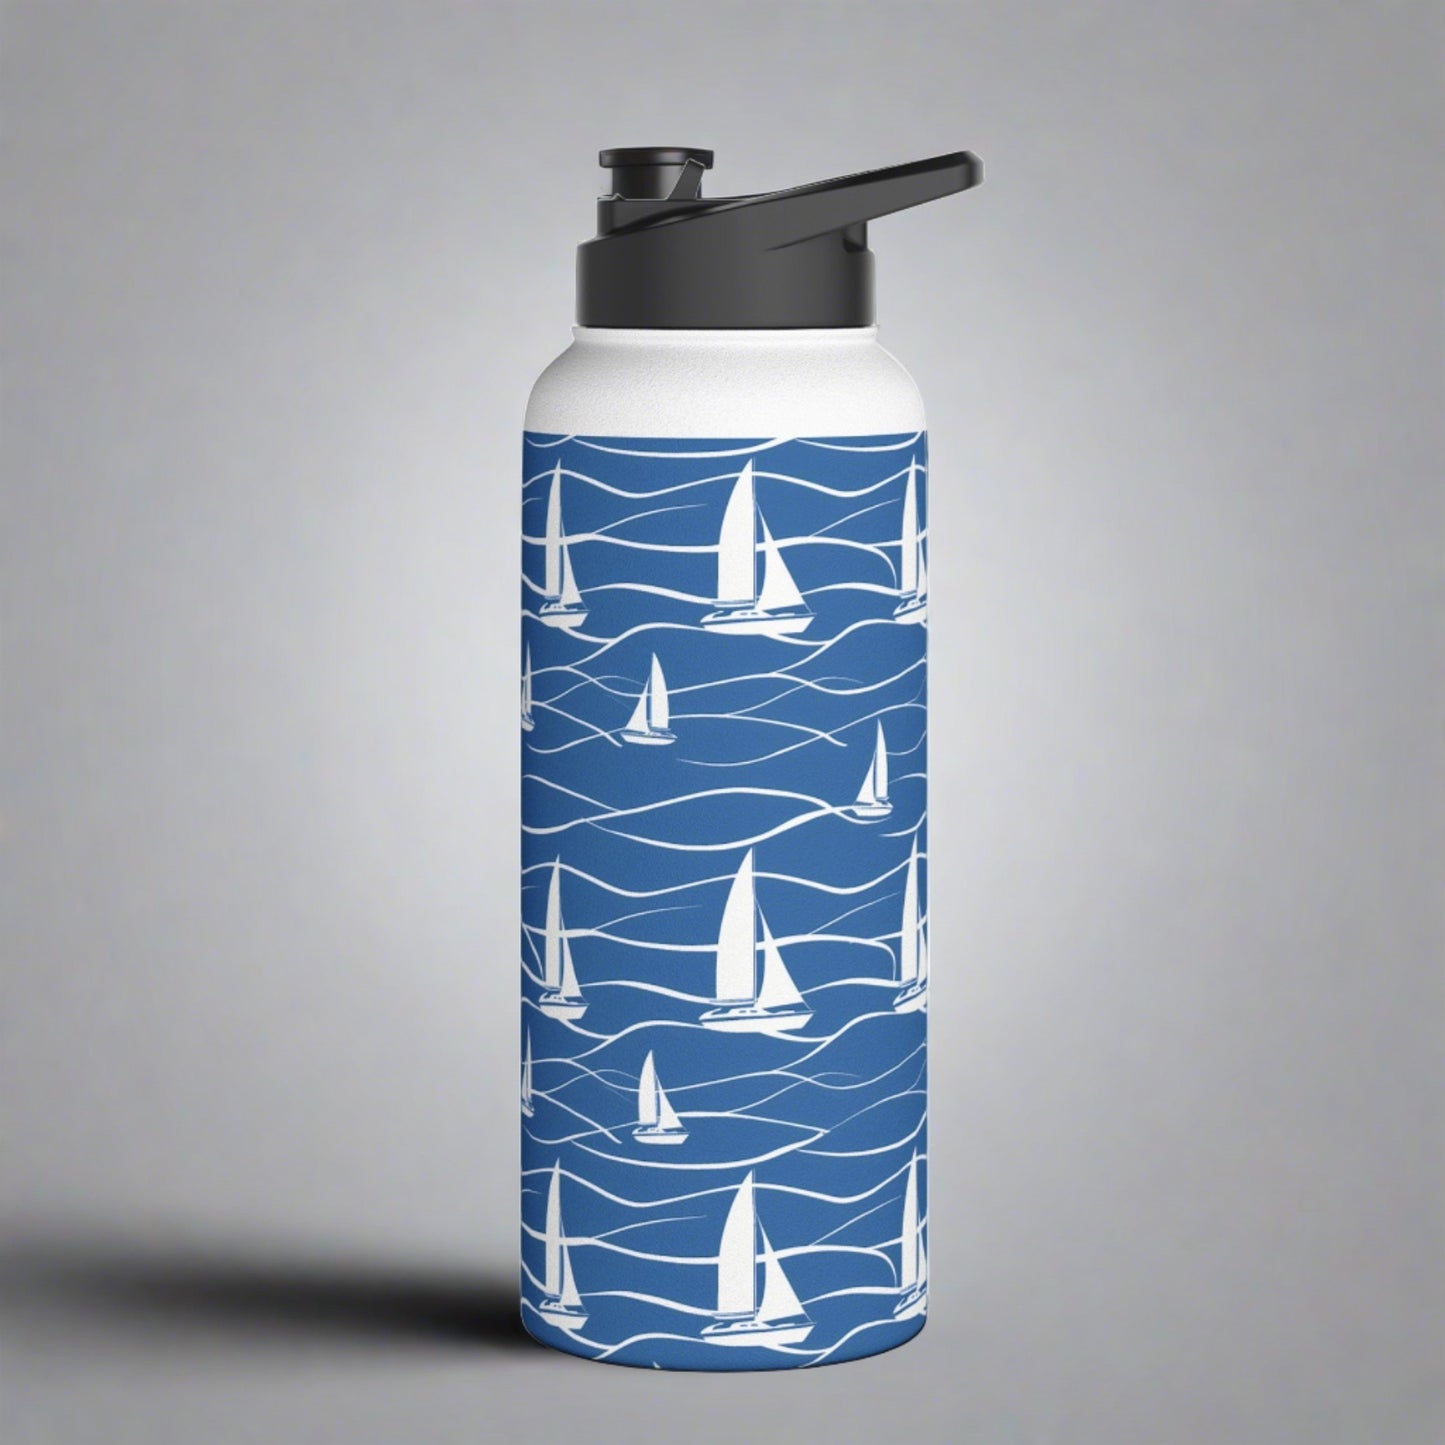 Stainless Steel Water Bottle Thermos, 32oz, Sailboats - Double Wall Insulation Keeps Drinks Hot or Cold